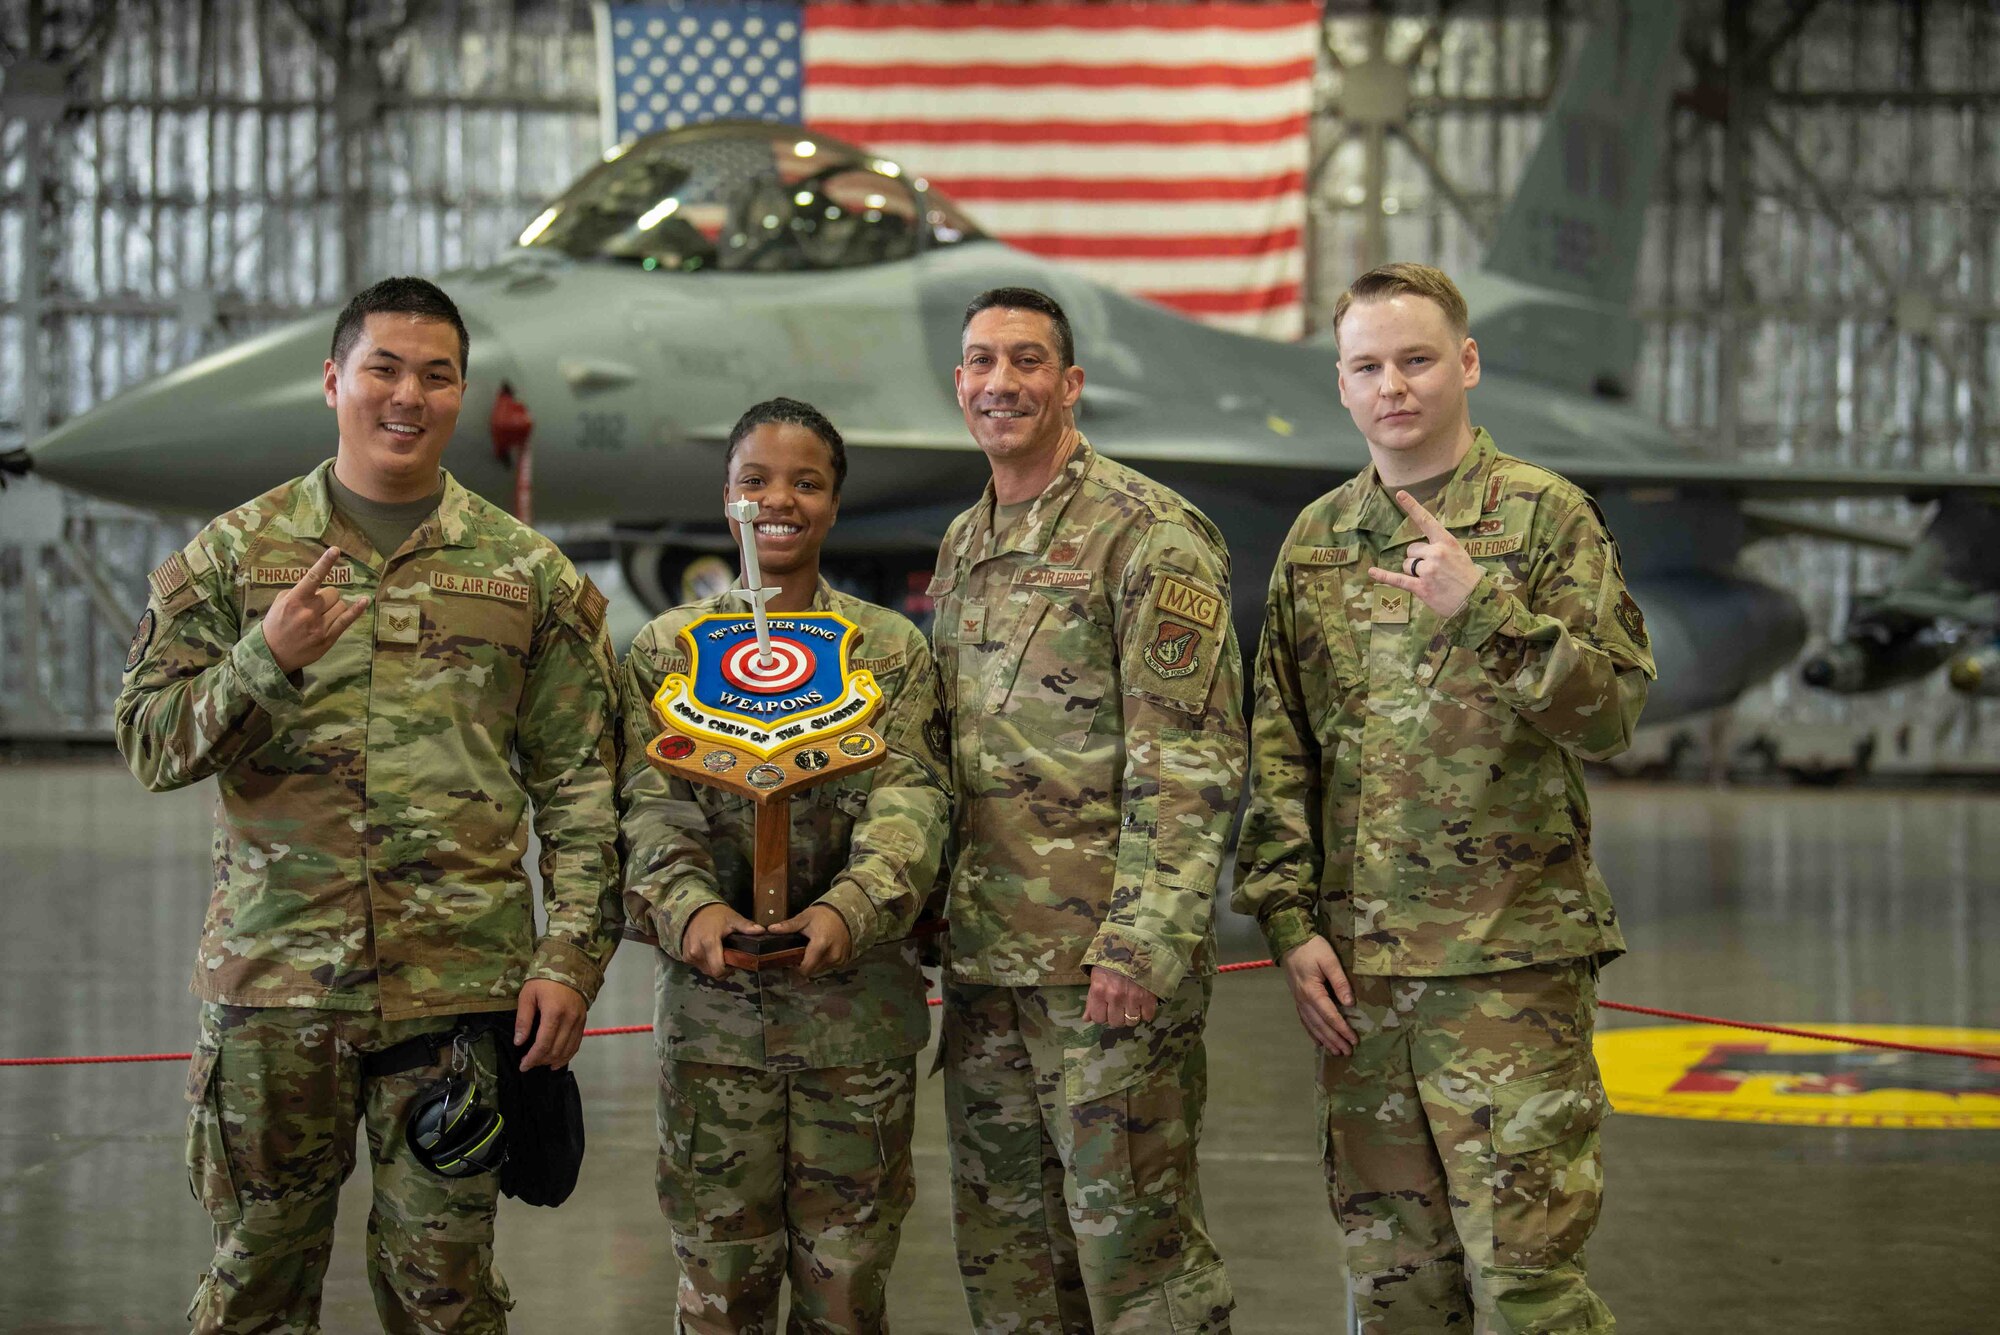 U.S. Air Force Airmen with the 14th Aircraft Maintenance Unit (AMU) pose for a photo with their leadership after winning the second quarter load crew competition at Misawa Air Base, Japan, July 1, 2022.